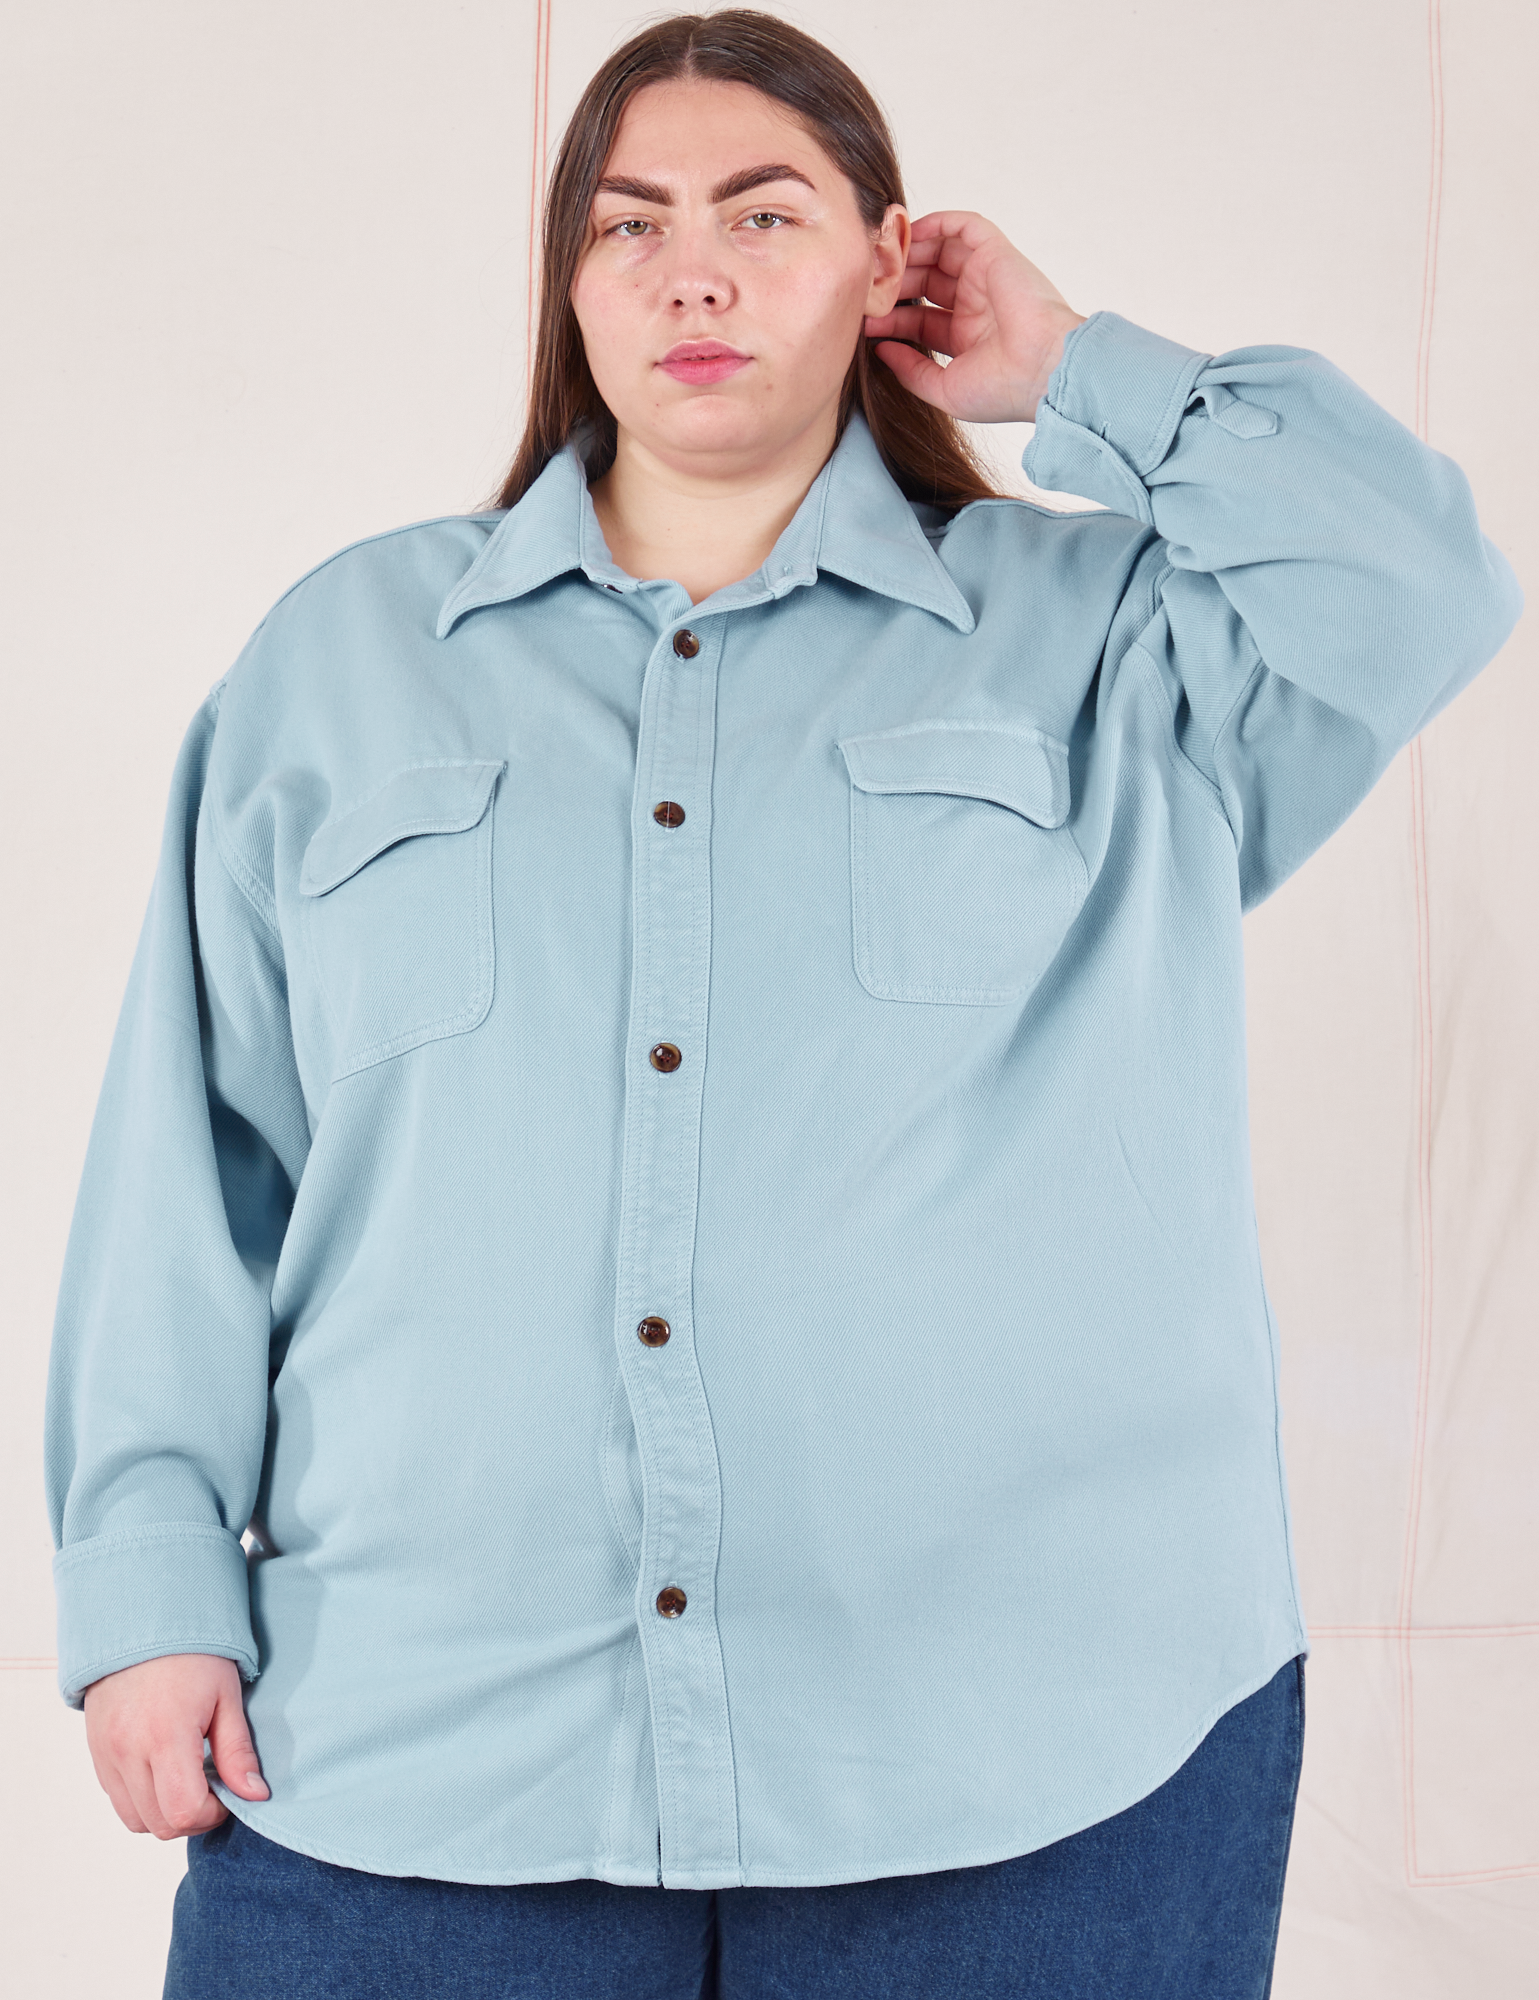 Marielena is wearing a buttoned up Flannel Overshirt in Baby Blue